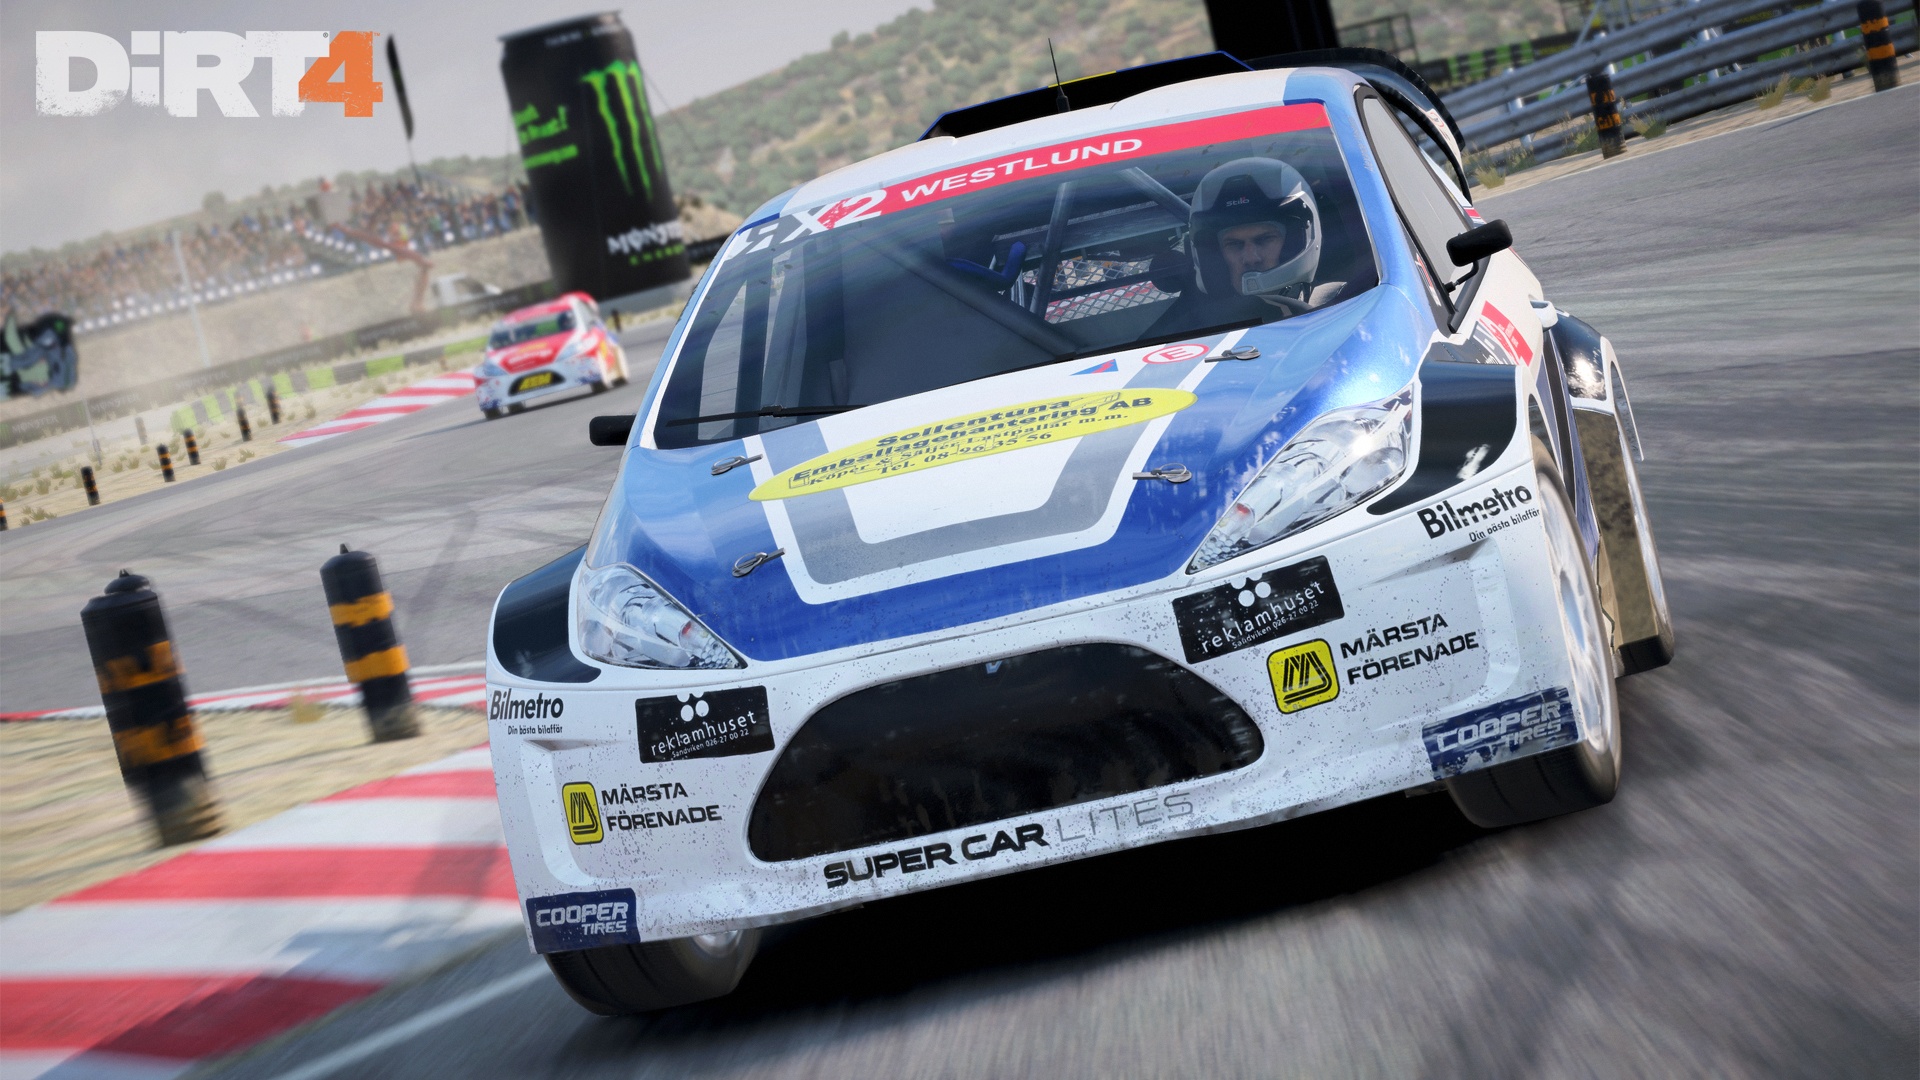 DiRT 4 Special Editions Announced